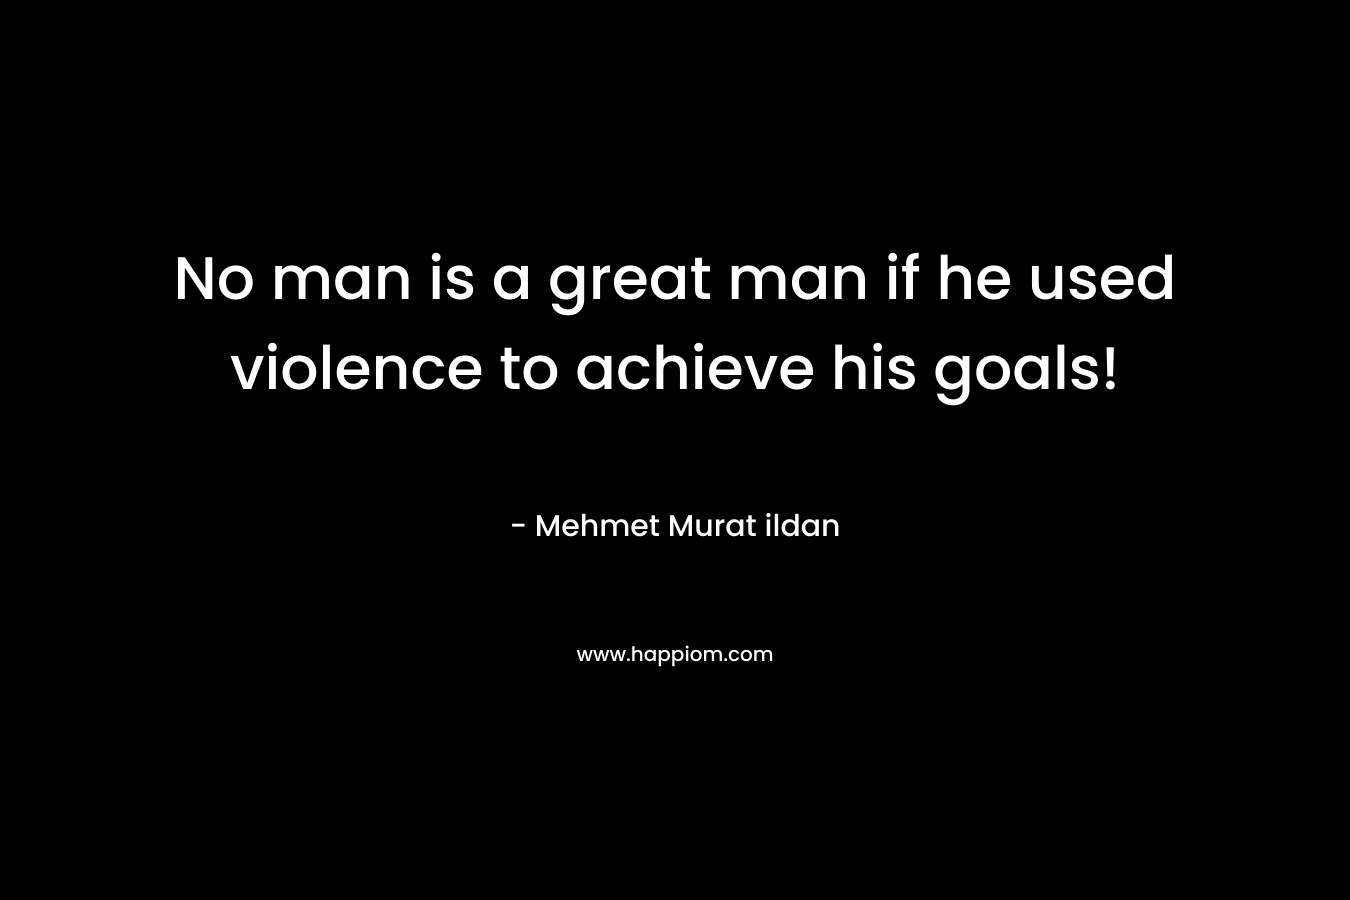 No man is a great man if he used violence to achieve his goals!